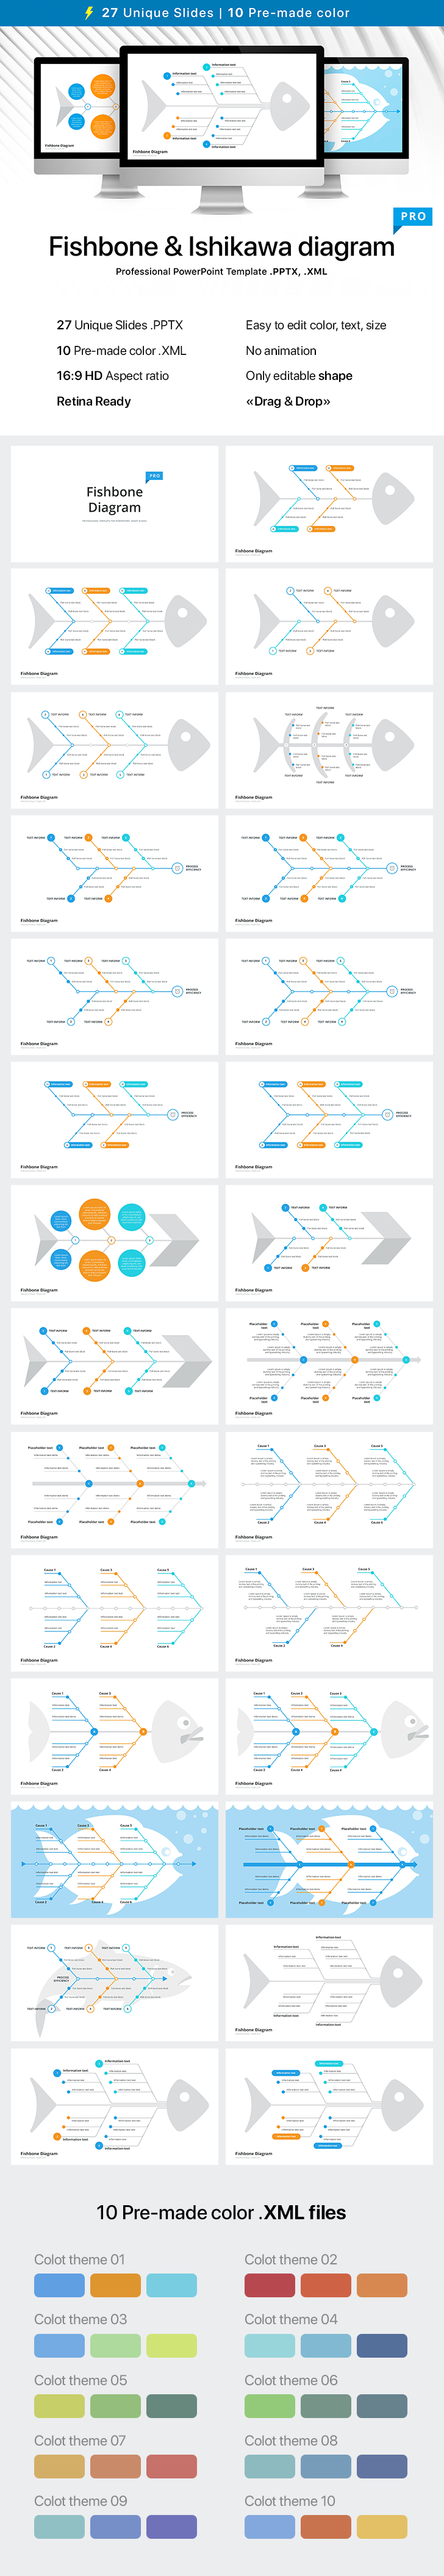 Fishbone Diagram Template Fishbone Diagram Template For Powerpoint Download Now